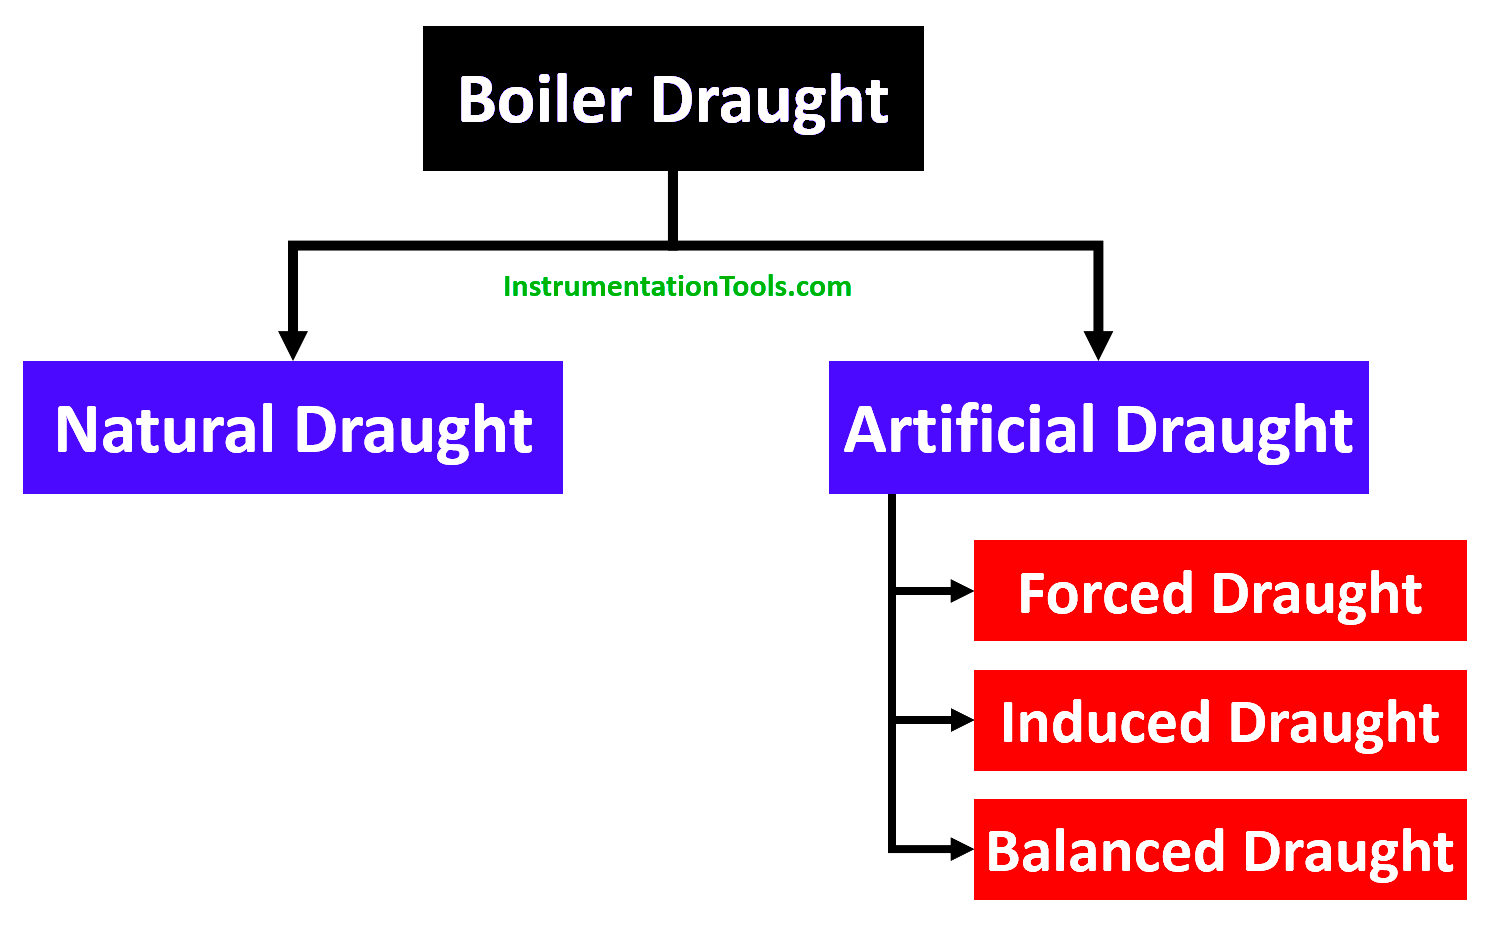 Types of Boiler Drought